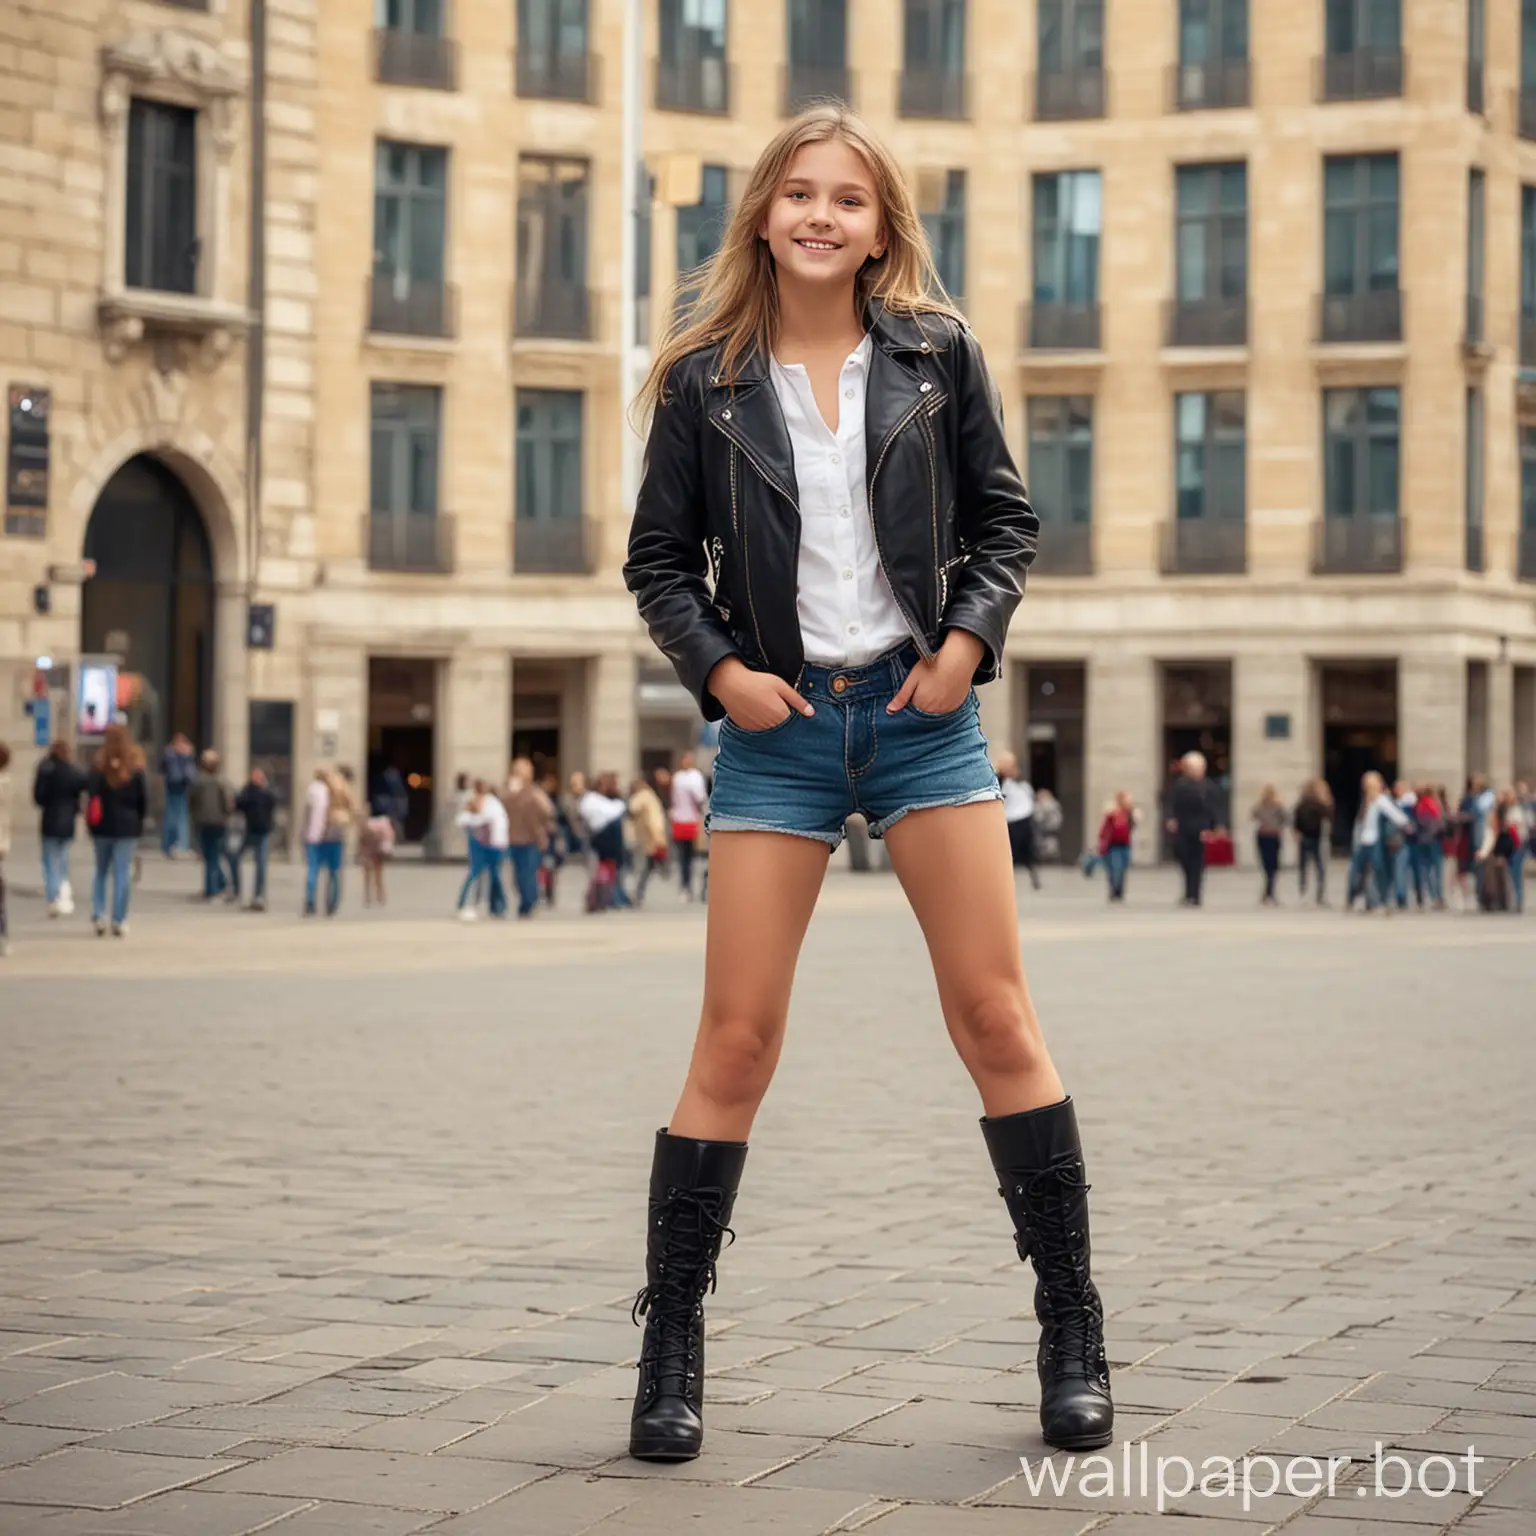 naked girl 12 years old, city square, many  girl  in full height, dynamic poses, smile, heels boots, jacket